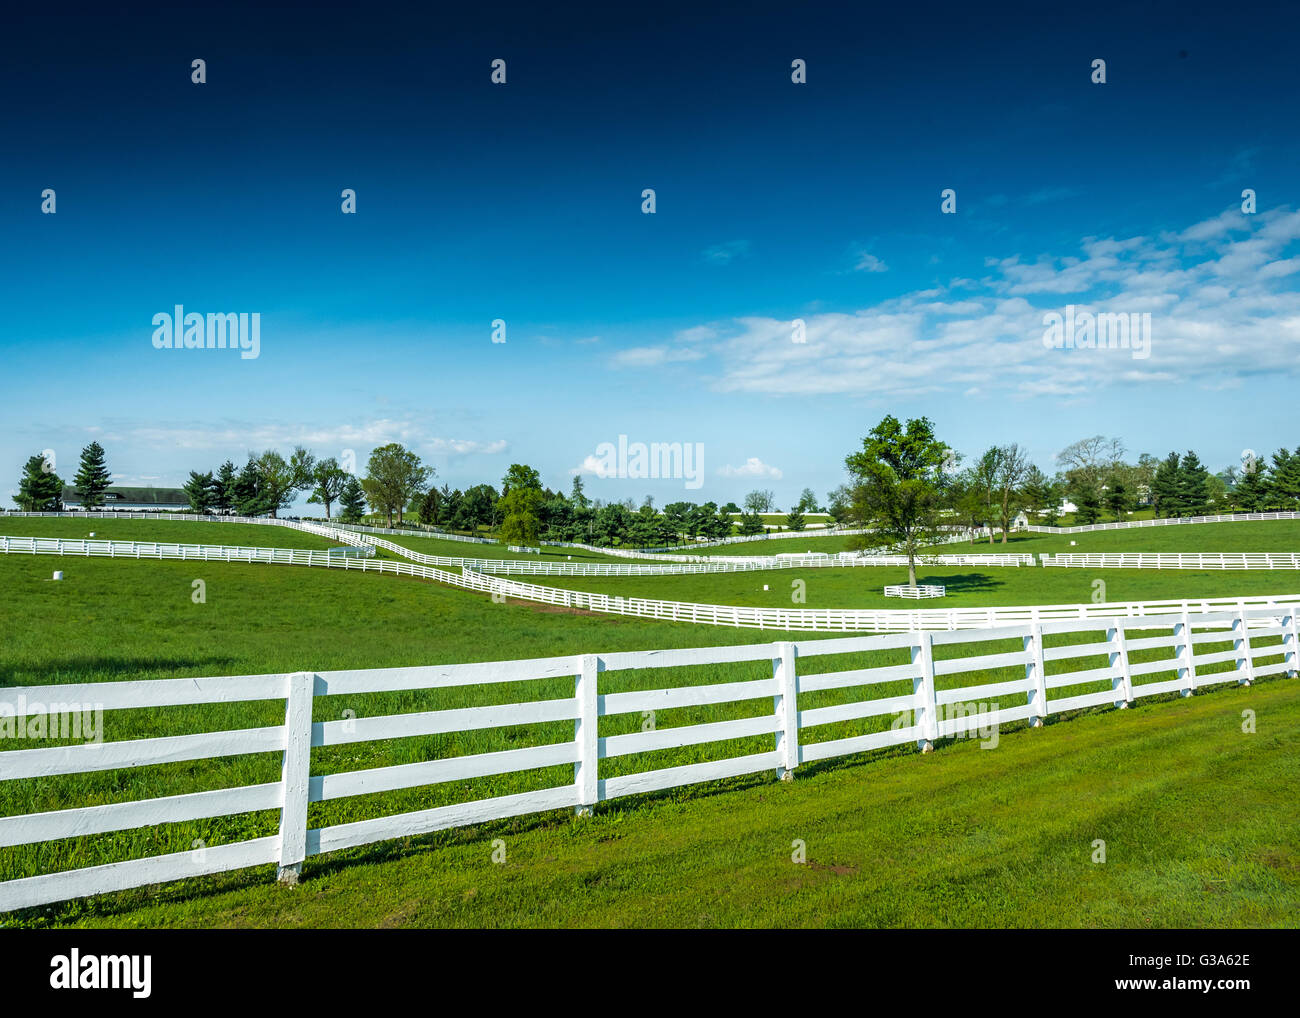 Overlooking the pastures and bright green grass of Kentucky horse farms Stock Photo